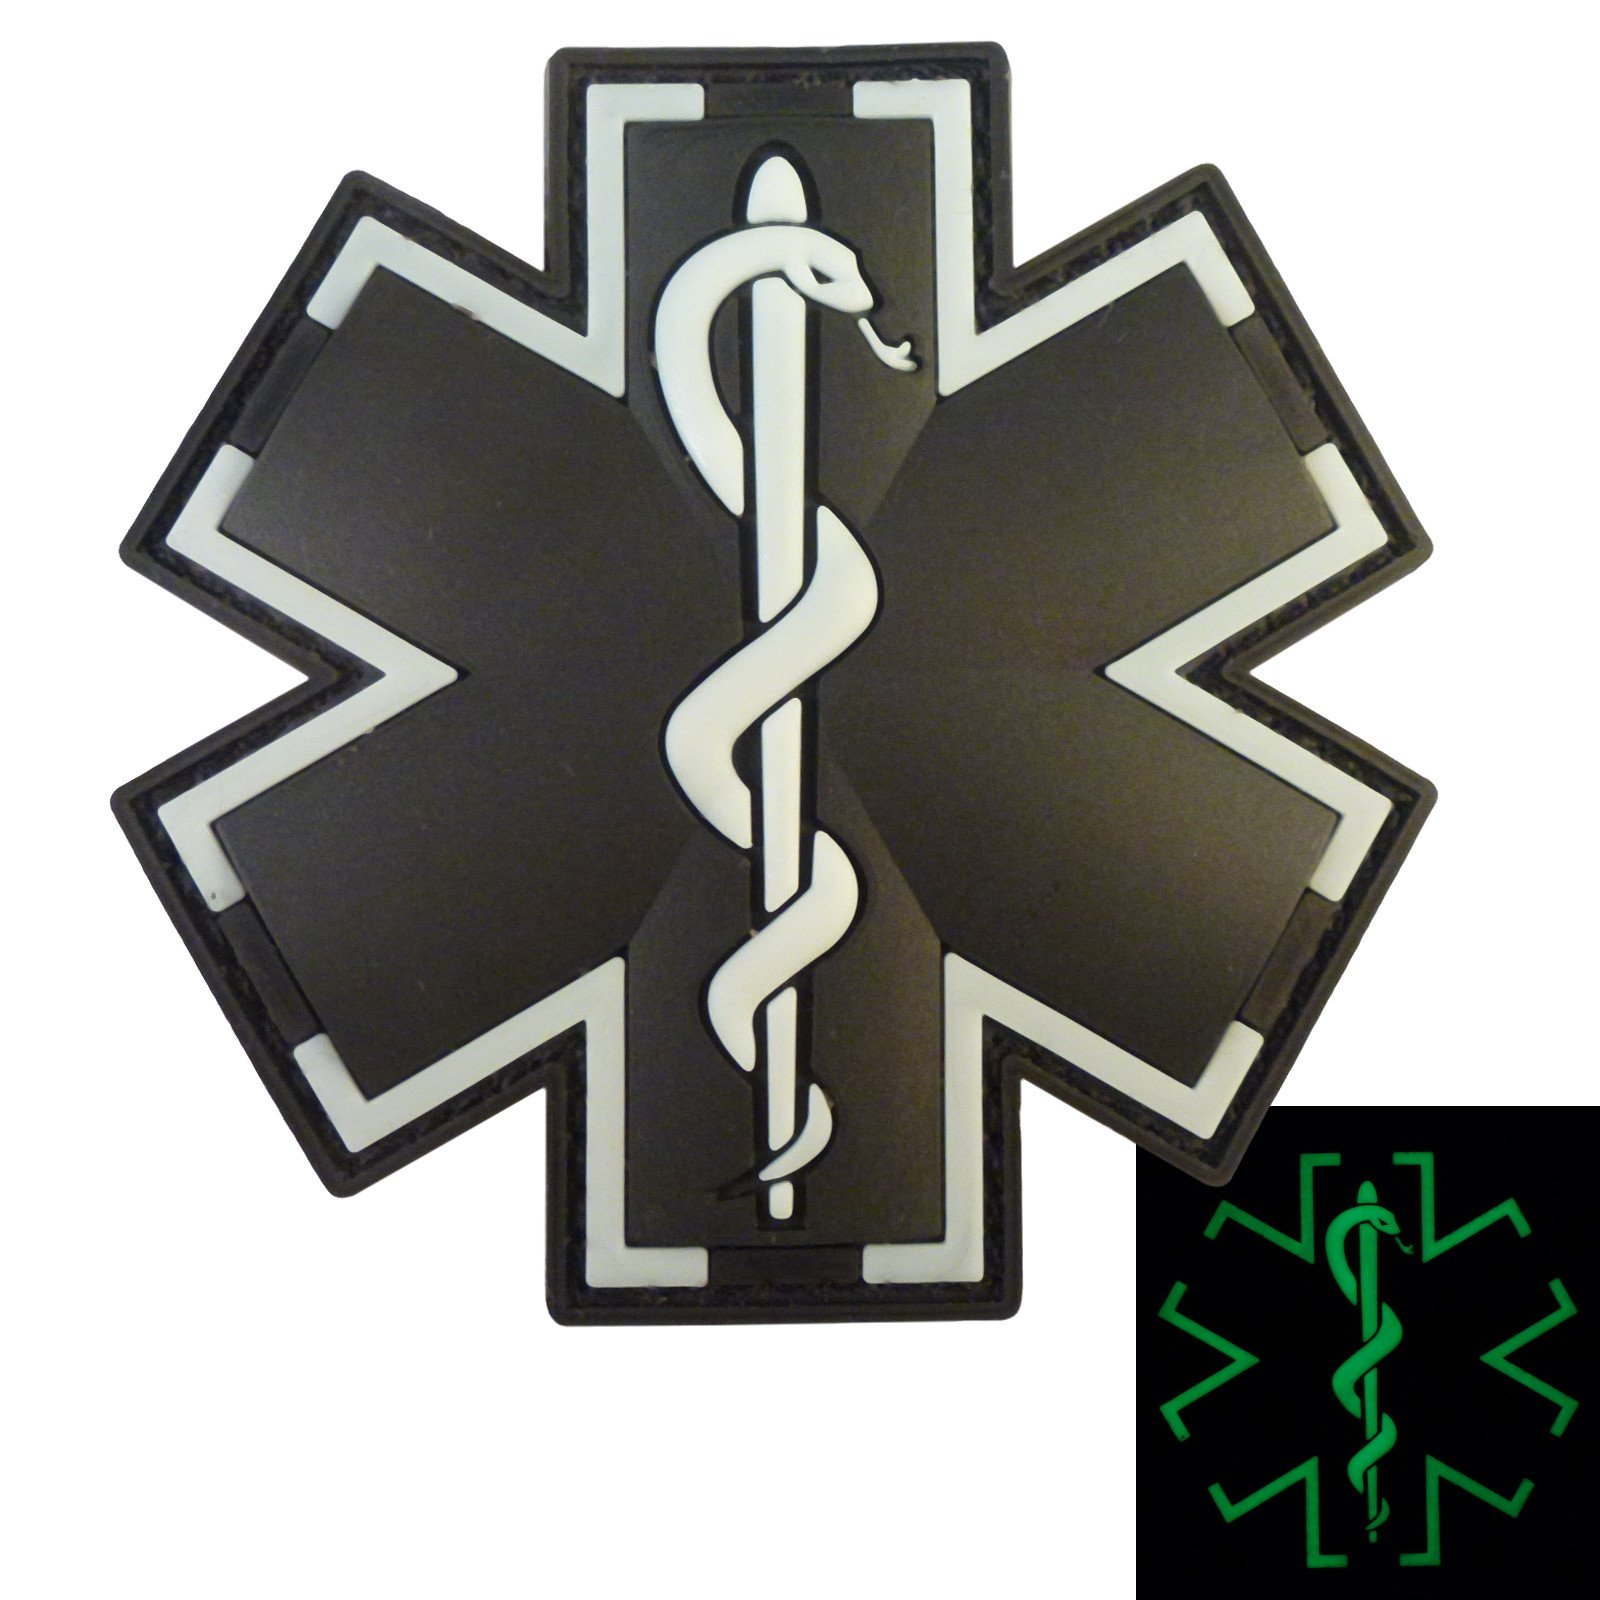  Glow in Dark Medic Cross First Aid Patches, EMS EMT MED Medical  Rescue Tactica Military Morale Combat Armband Badges with Hook and Loop  Fastener Backing, 3.54 x 1.97 Inch, 2 Pieces 